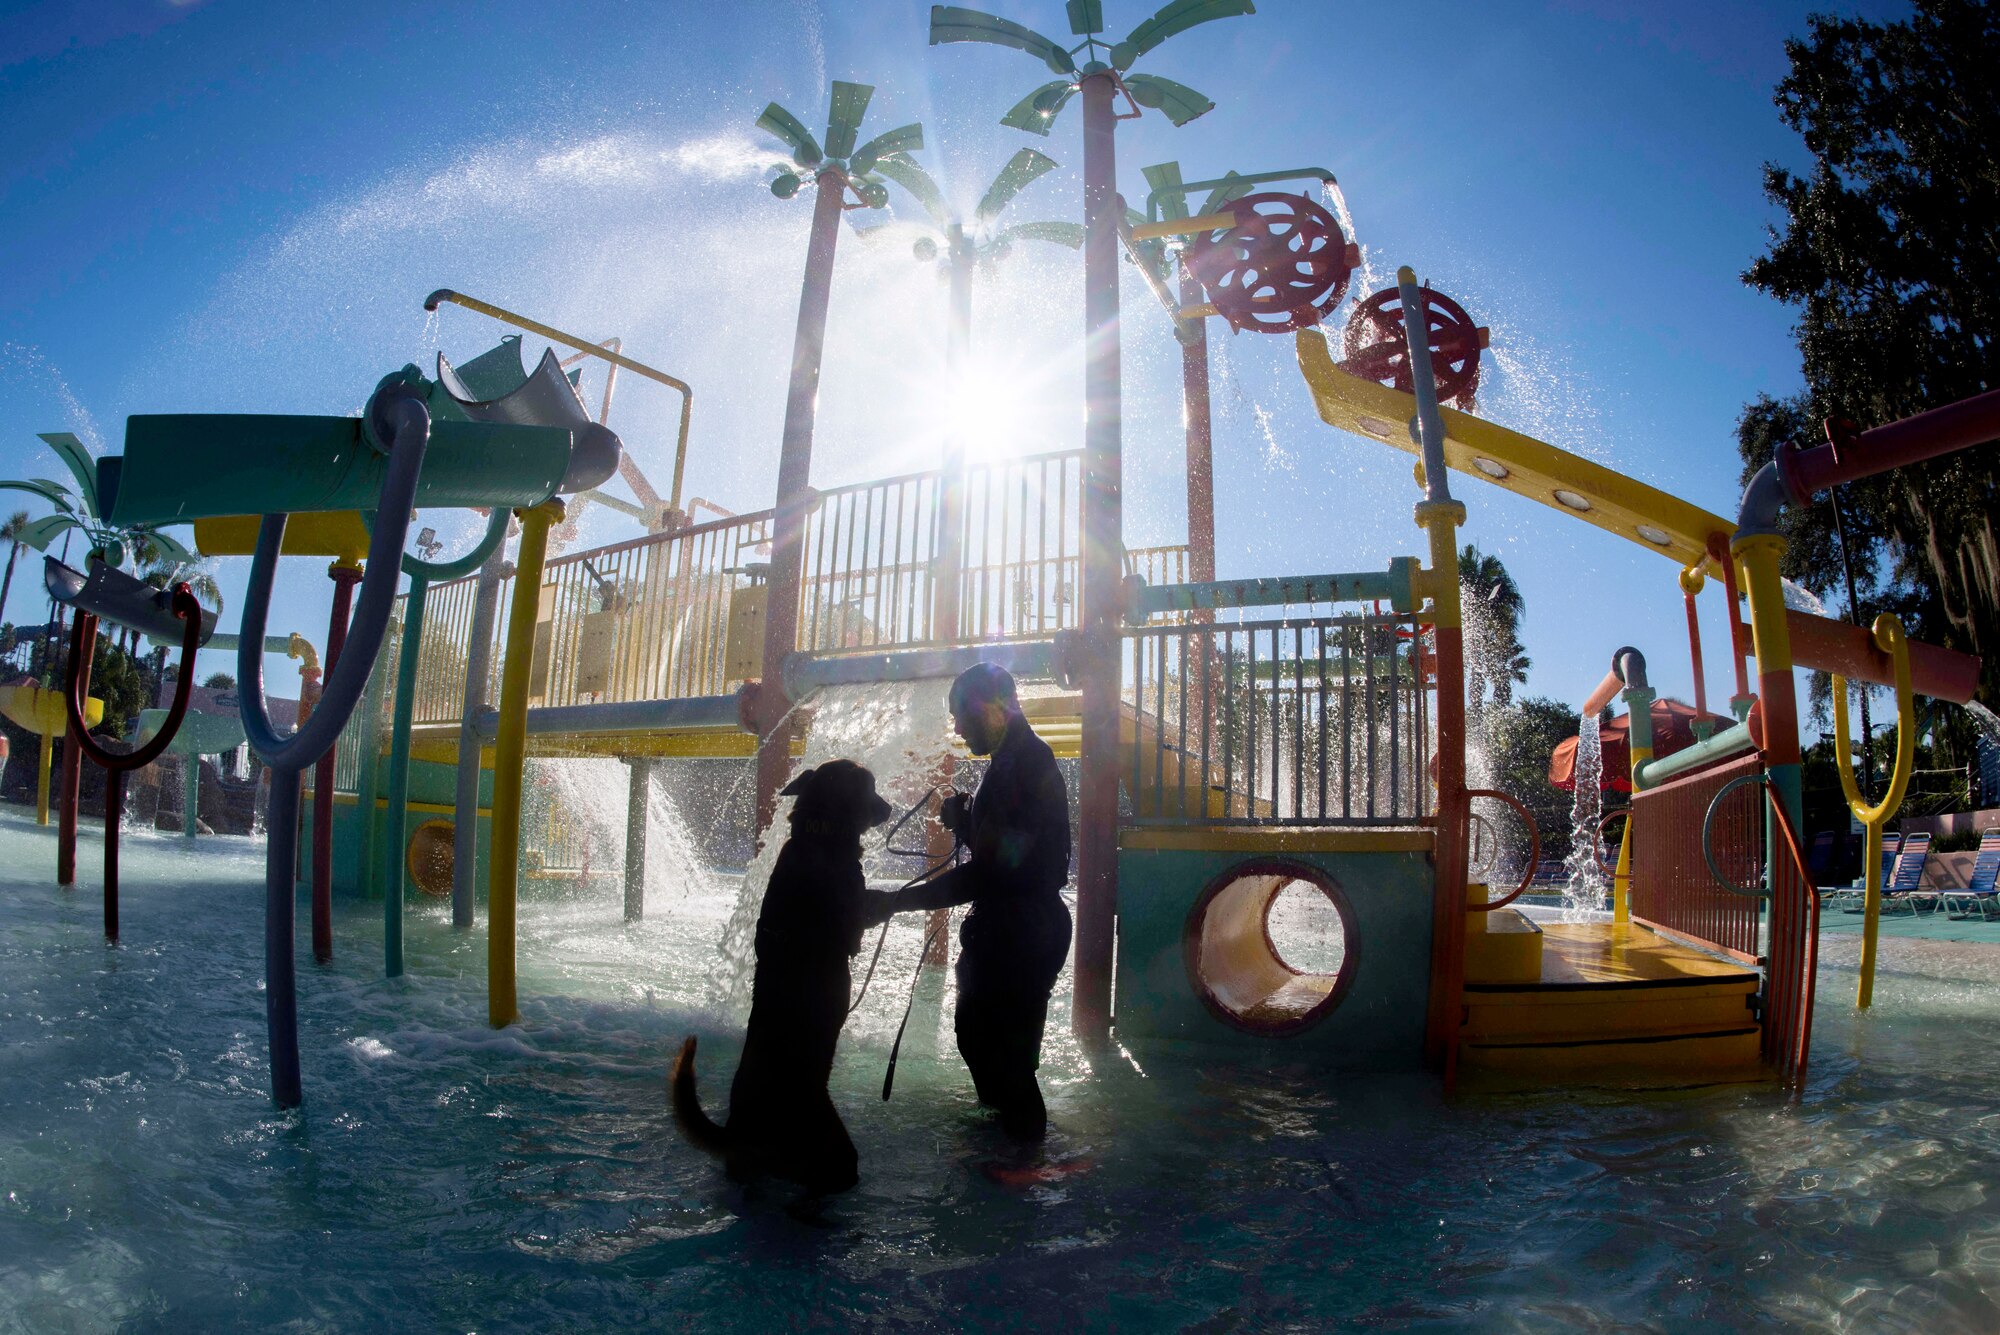 U.S. Air Force Senior Airman Damion Morris, a military dog handler assigned to the 6th Security Forces Squadron, tests the water with his military working dog, Lleonard, at Adventure Island, Tampa, Fla. Oct. 29, 2018.